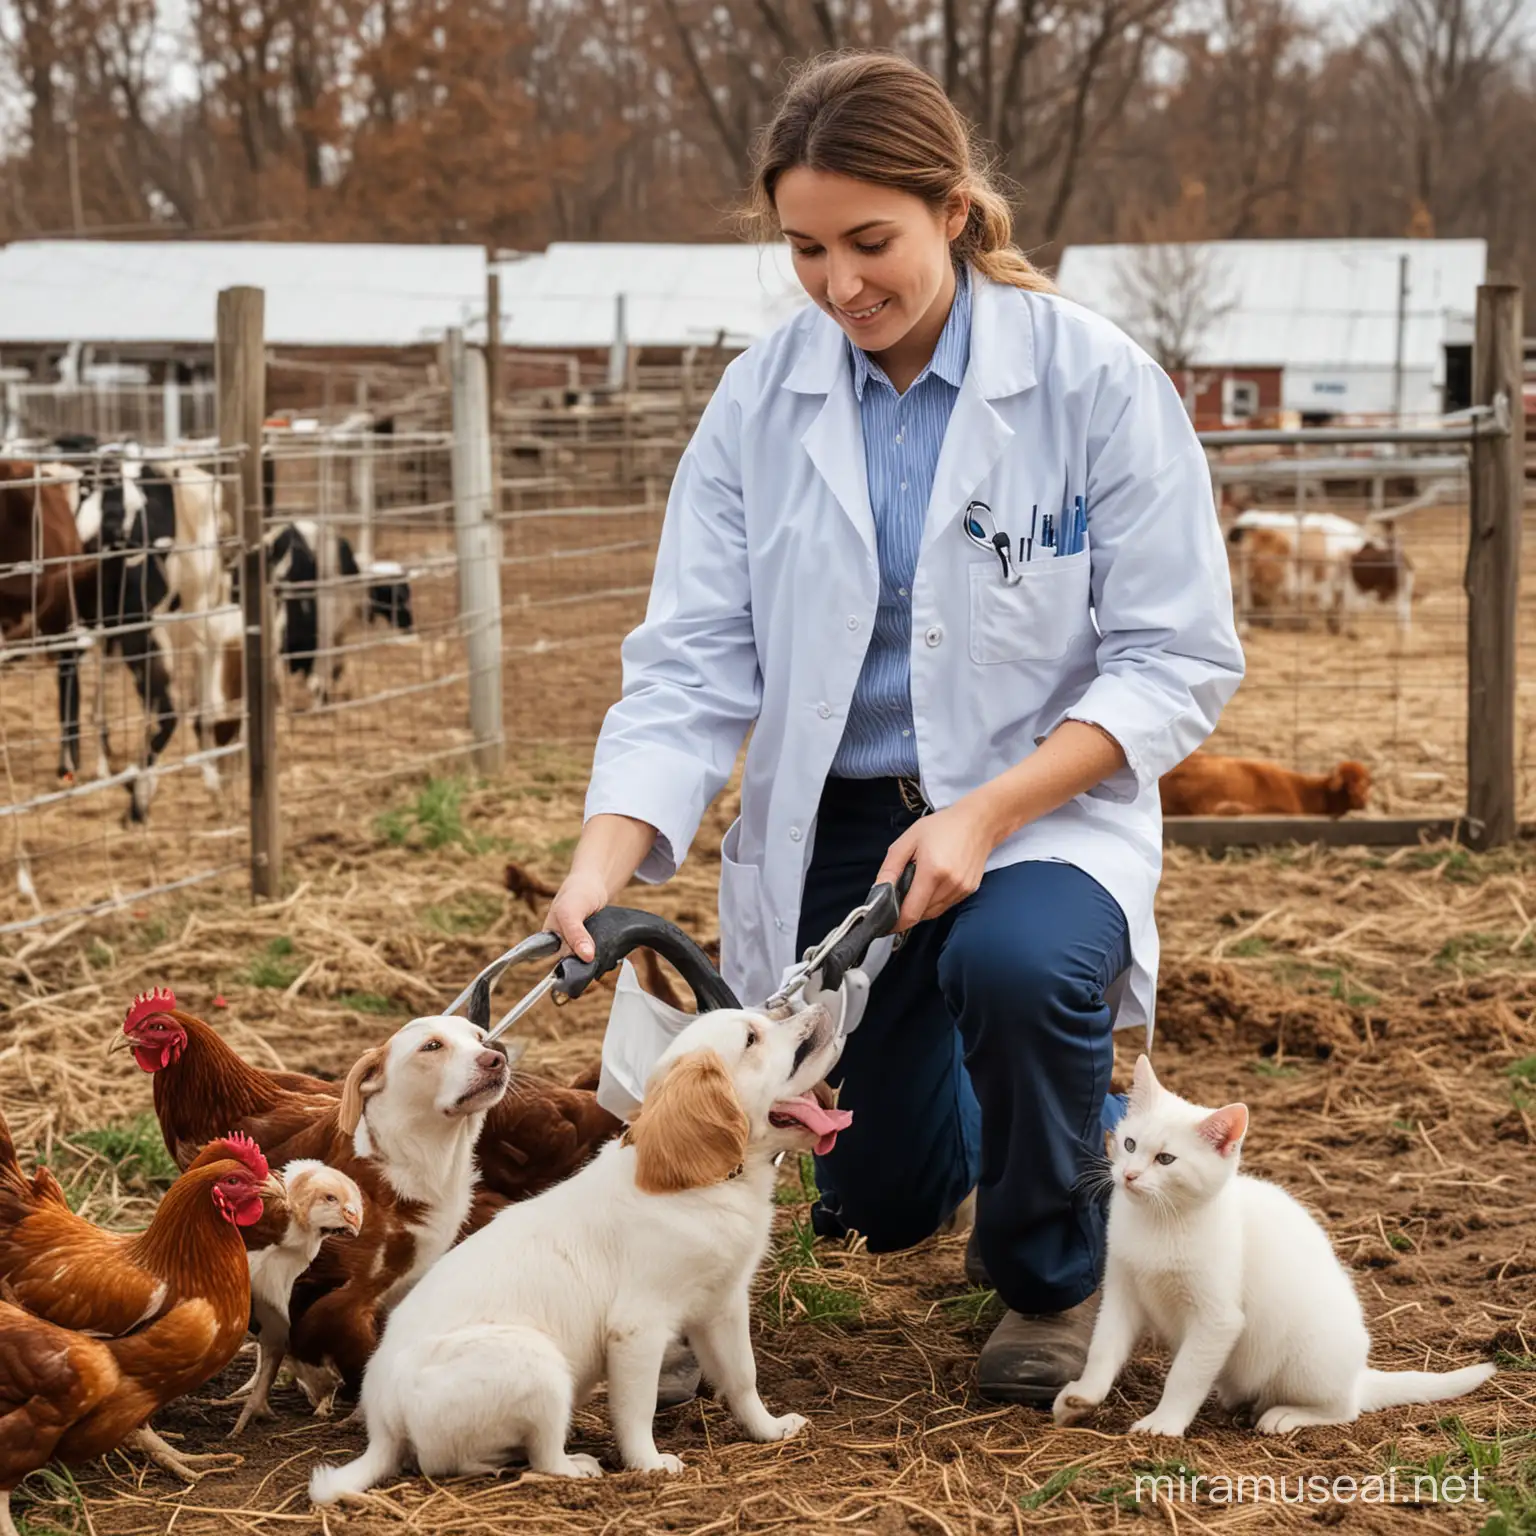 Veterinarian Treating Various Farm Animals Chickens Cows Cats and Dogs